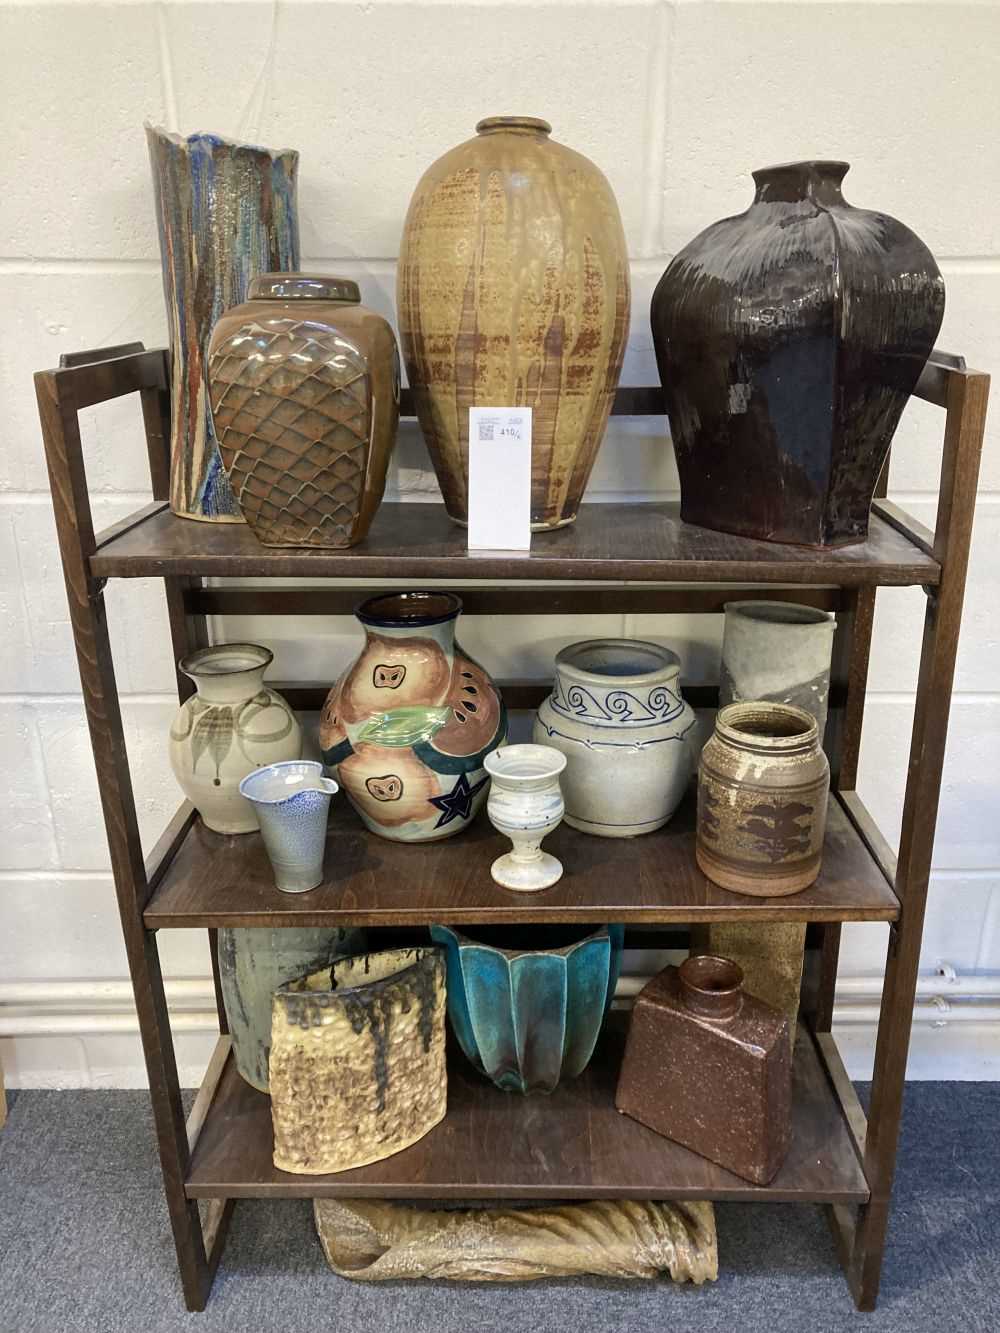 Lot 410 - Studio Pottery. A collection of studio pottery including a vase by David Frith, Brookhouse Pottery